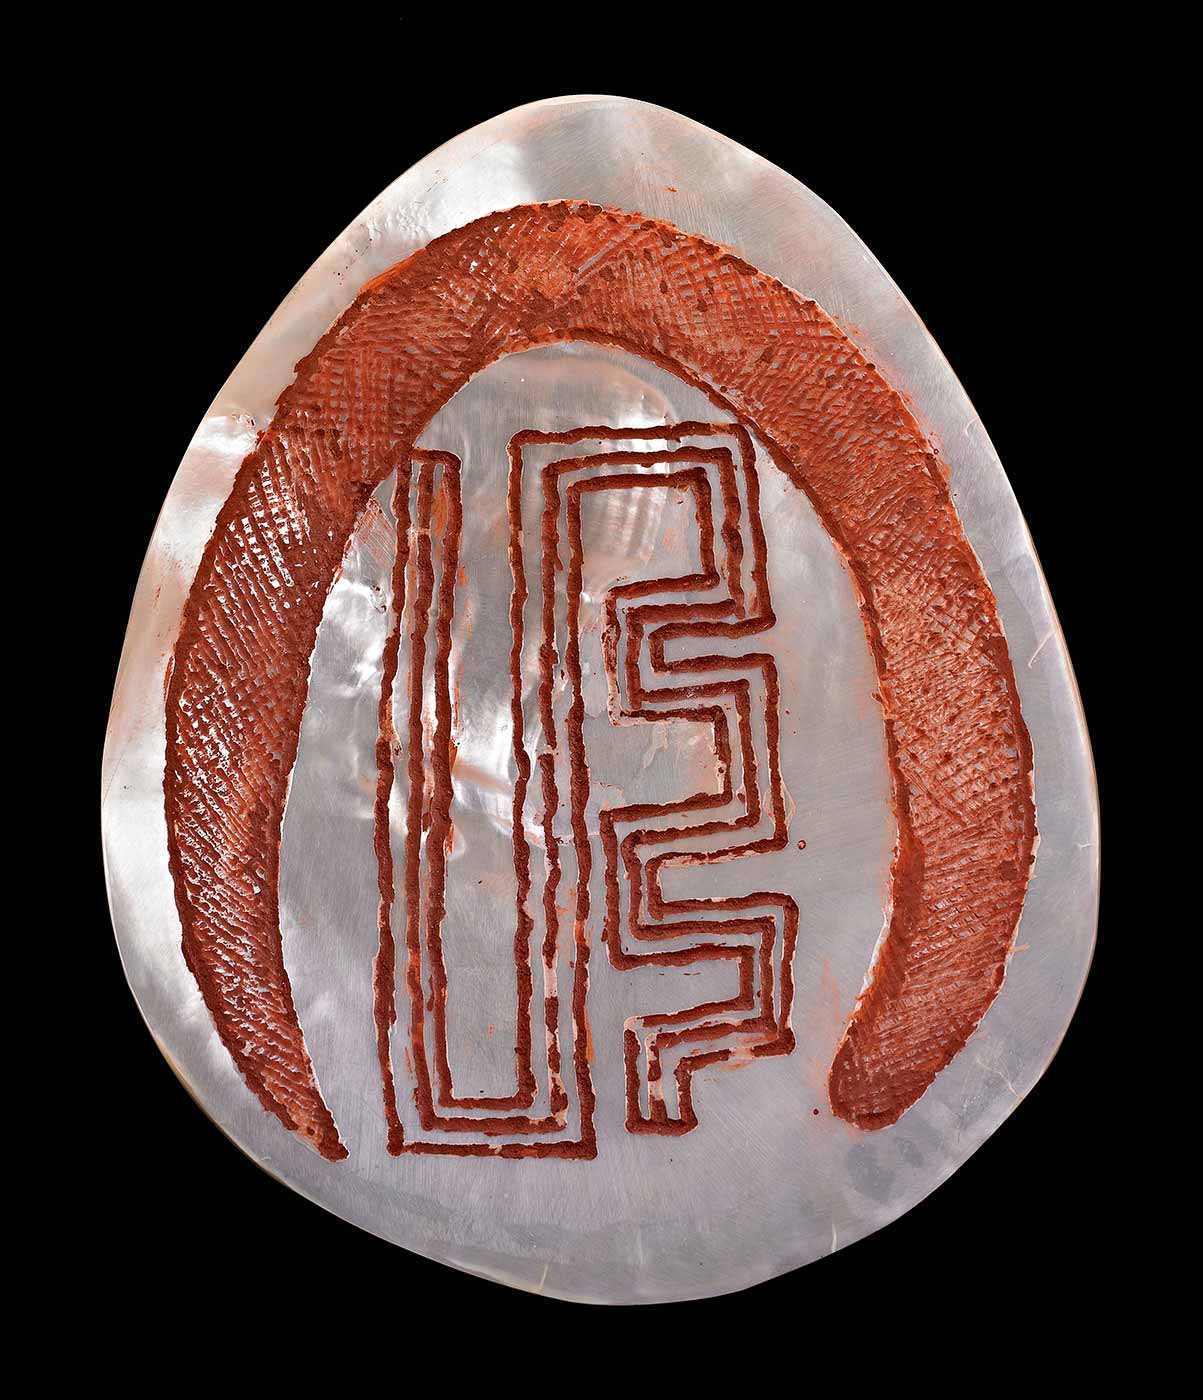 Ornament made from carved and polished pearlshell. Incised with the design of the Rainbow Serpent with red ochre filling the incisions.